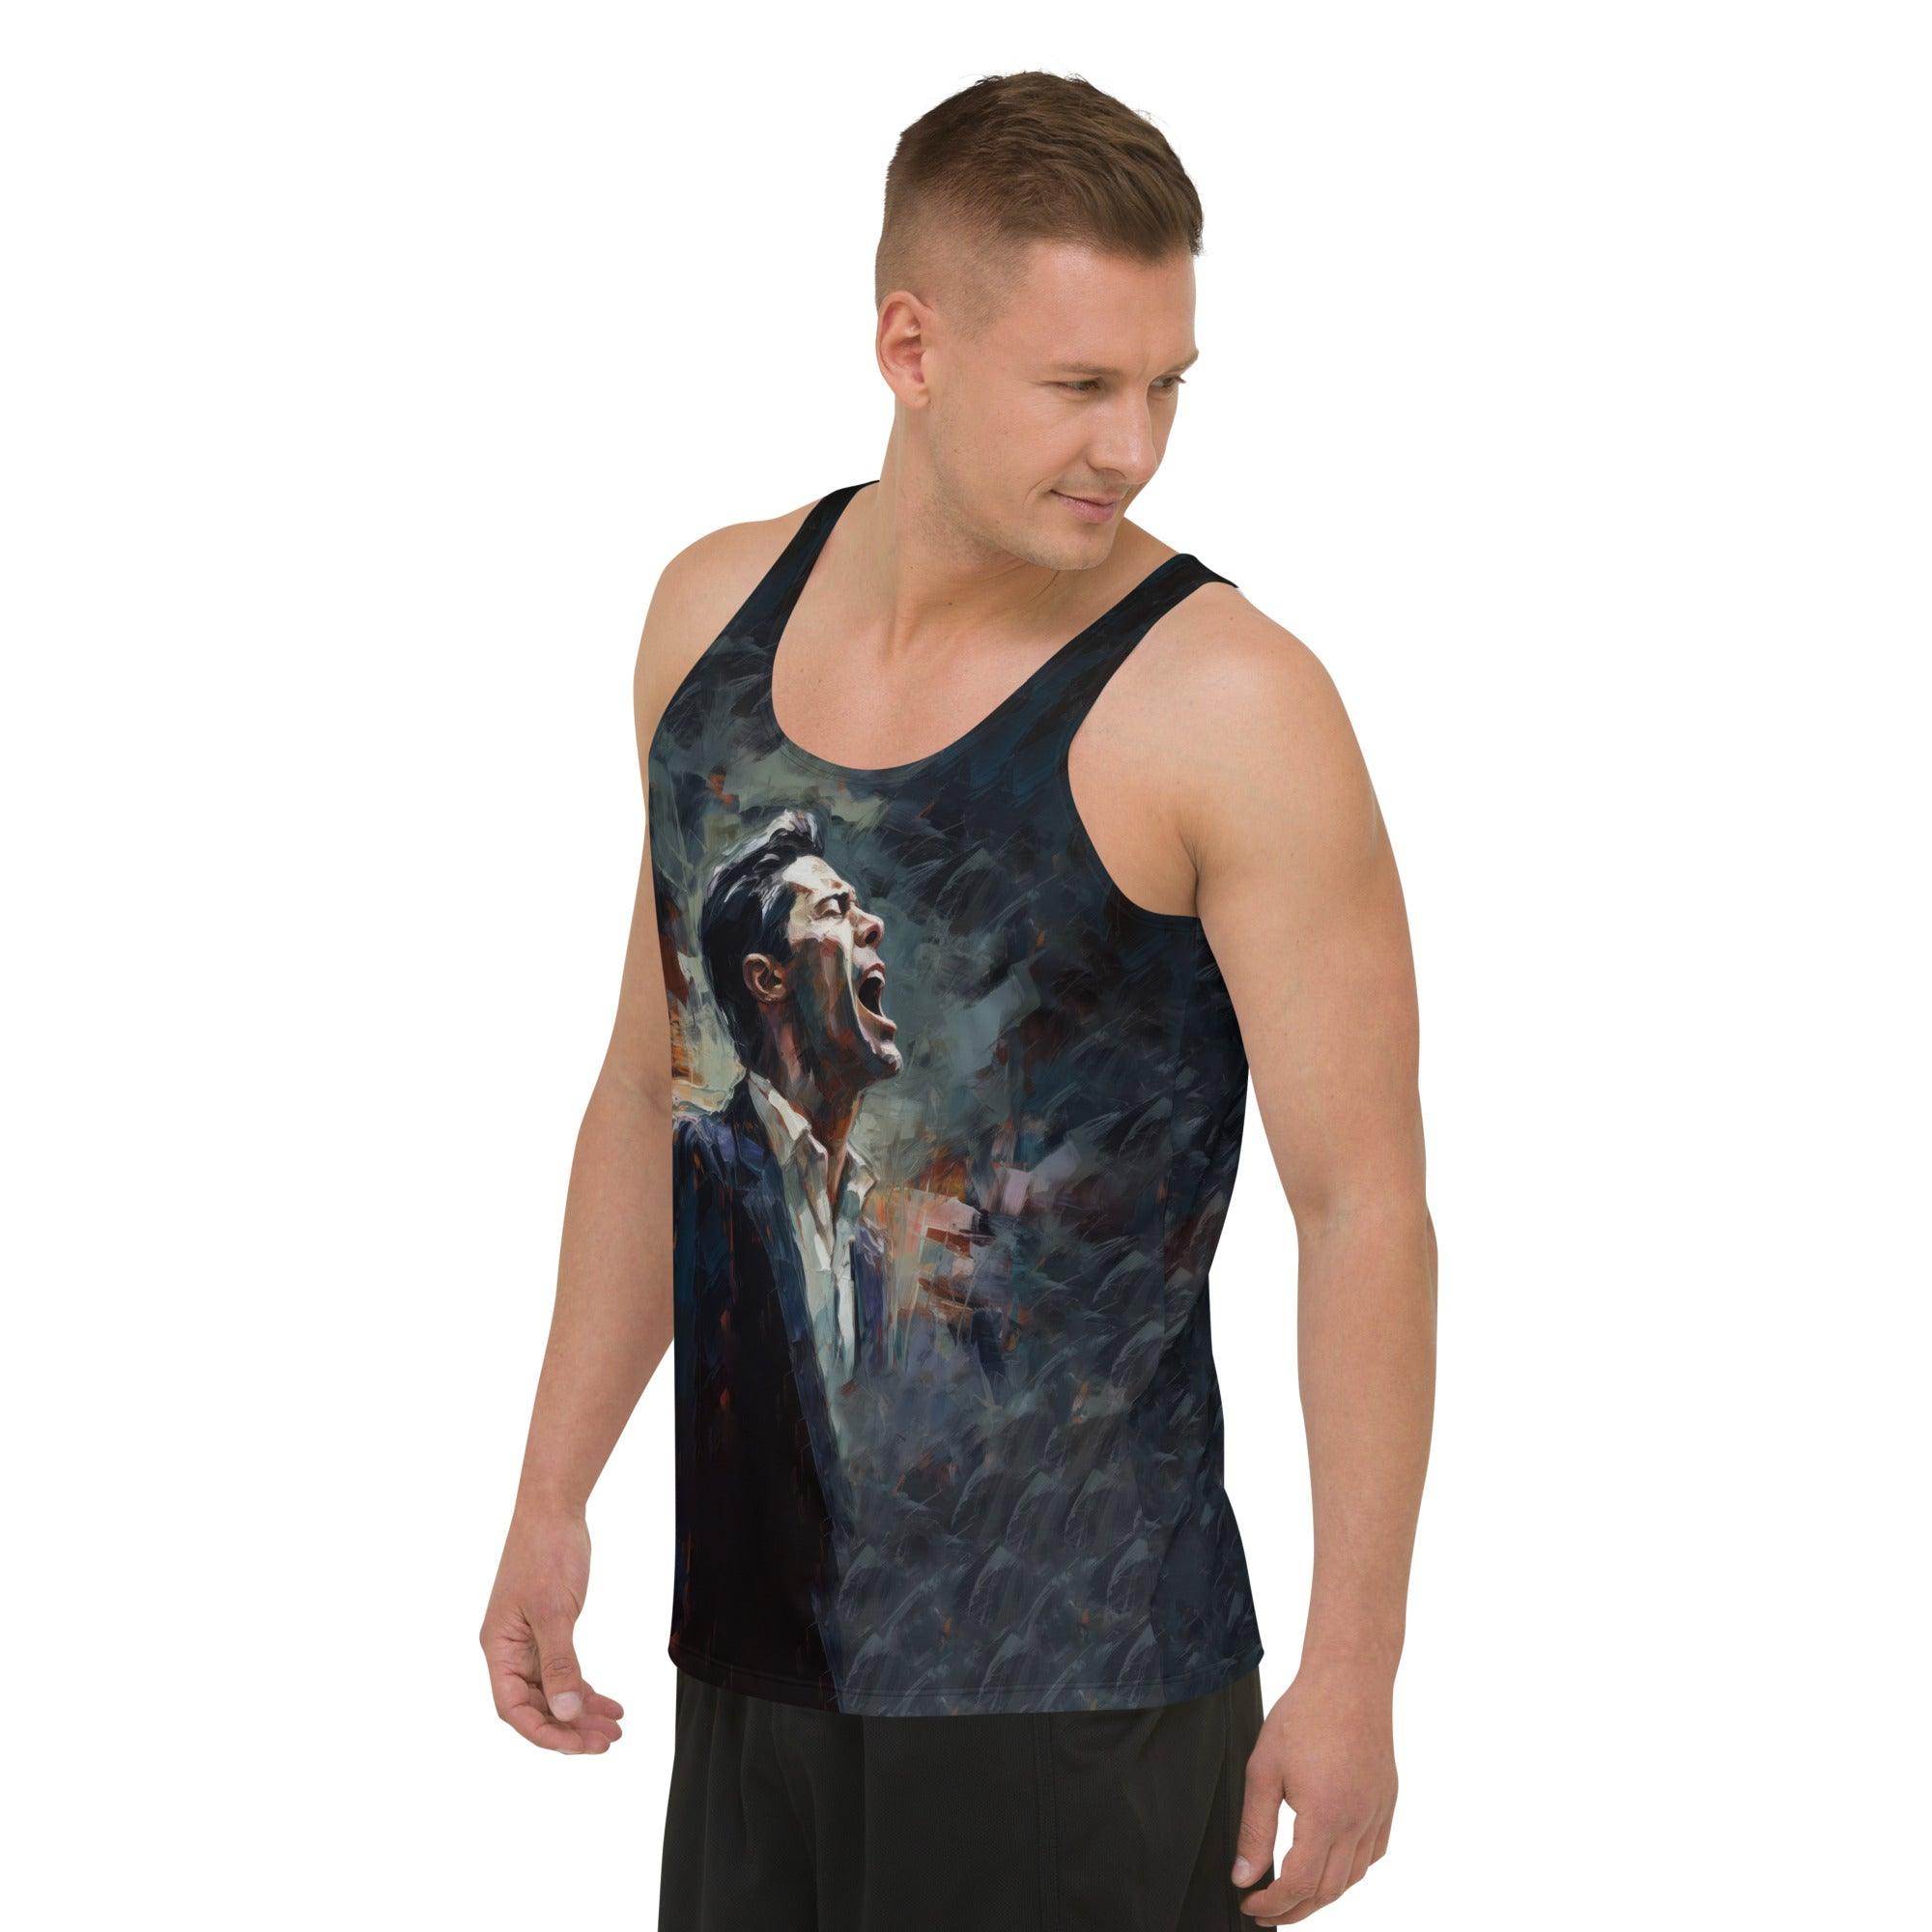 Stylish Tonal Tapestry Tank Top for Men, ideal for summer fashion.